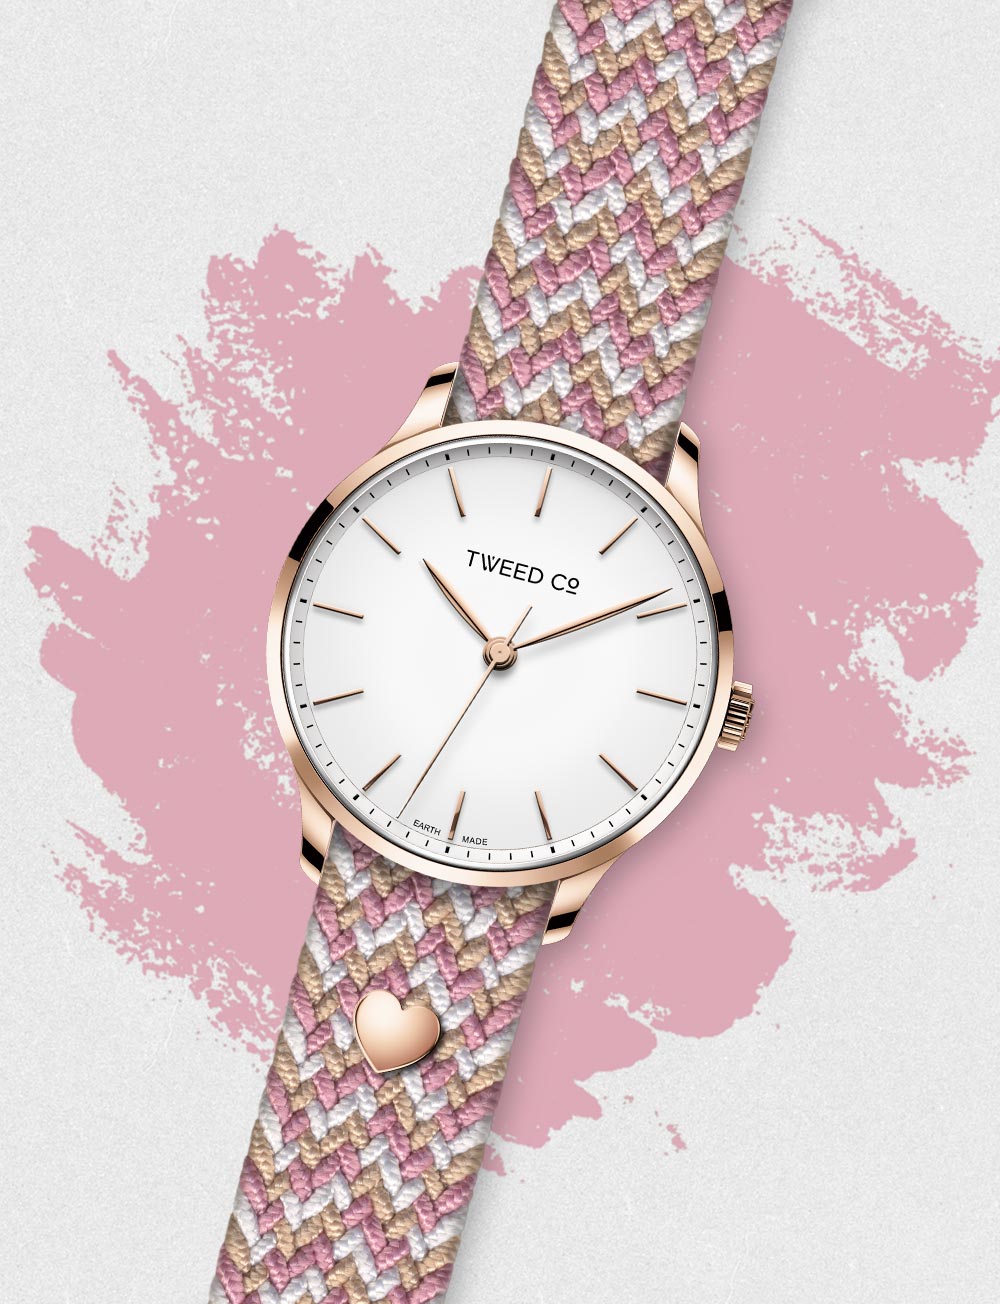 Swiss sophistication and infinite style: Tweed Co. watches strike the perfect balance